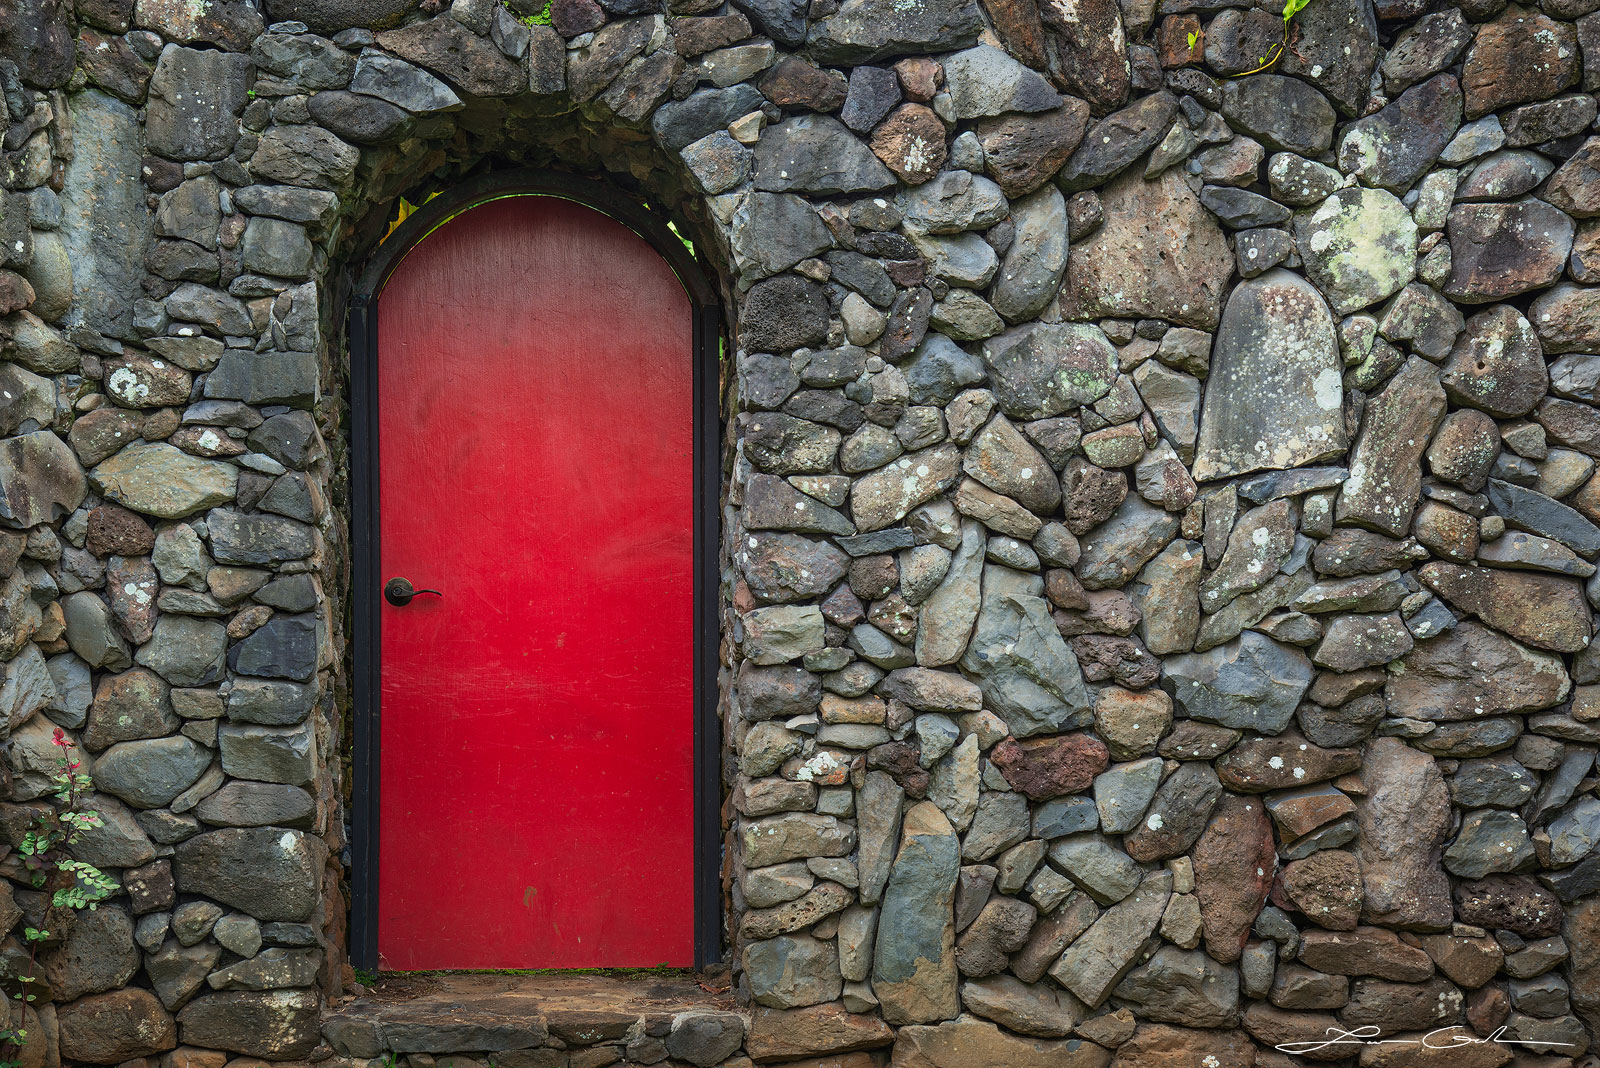 Fine art photography print 'The Scarlet Portal' depicting a vibrant red door embedded in a lava rock wall in Maui, with a single red flower in the foreground - Gintchin Fine Art